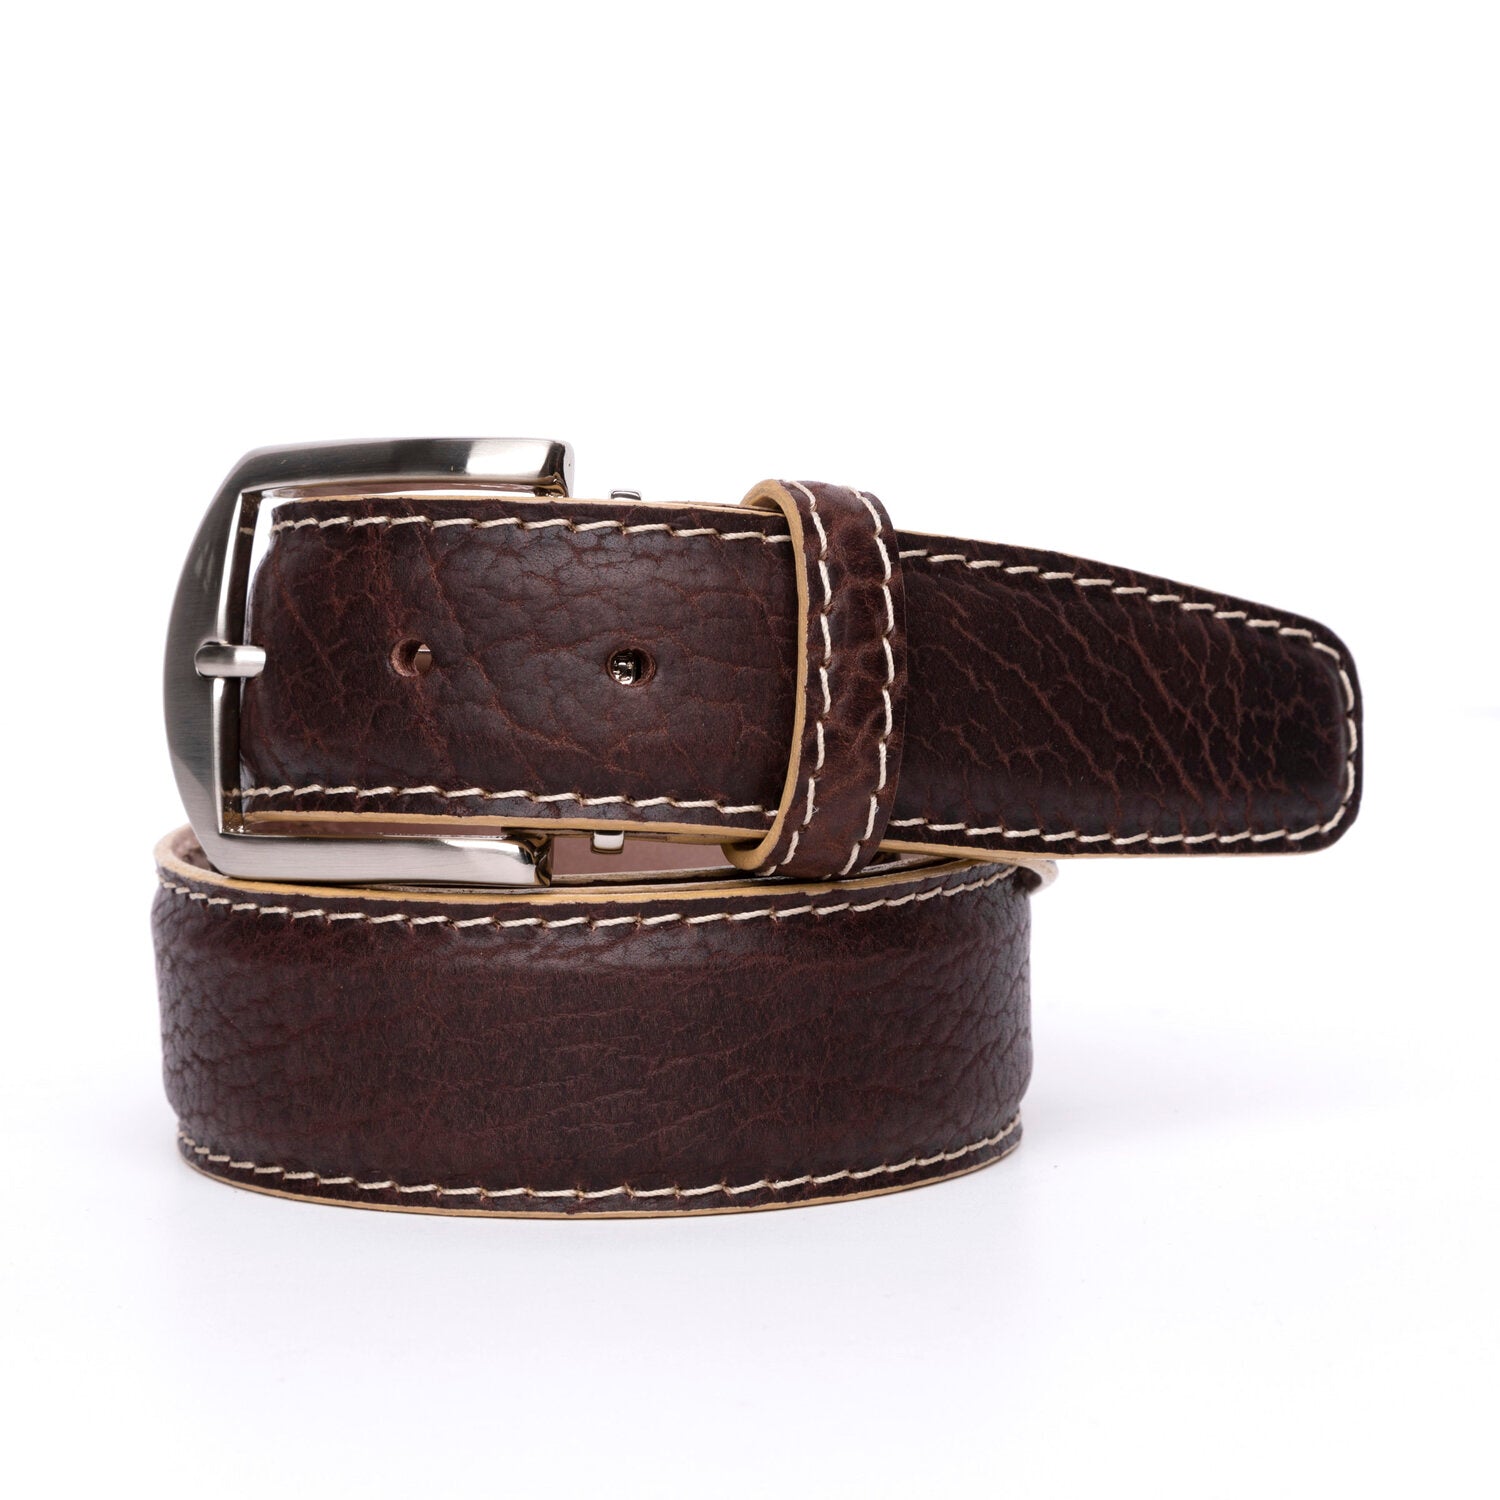 American Bison Belt in Brown with Beige Stitching by L.E.N. Bespoke